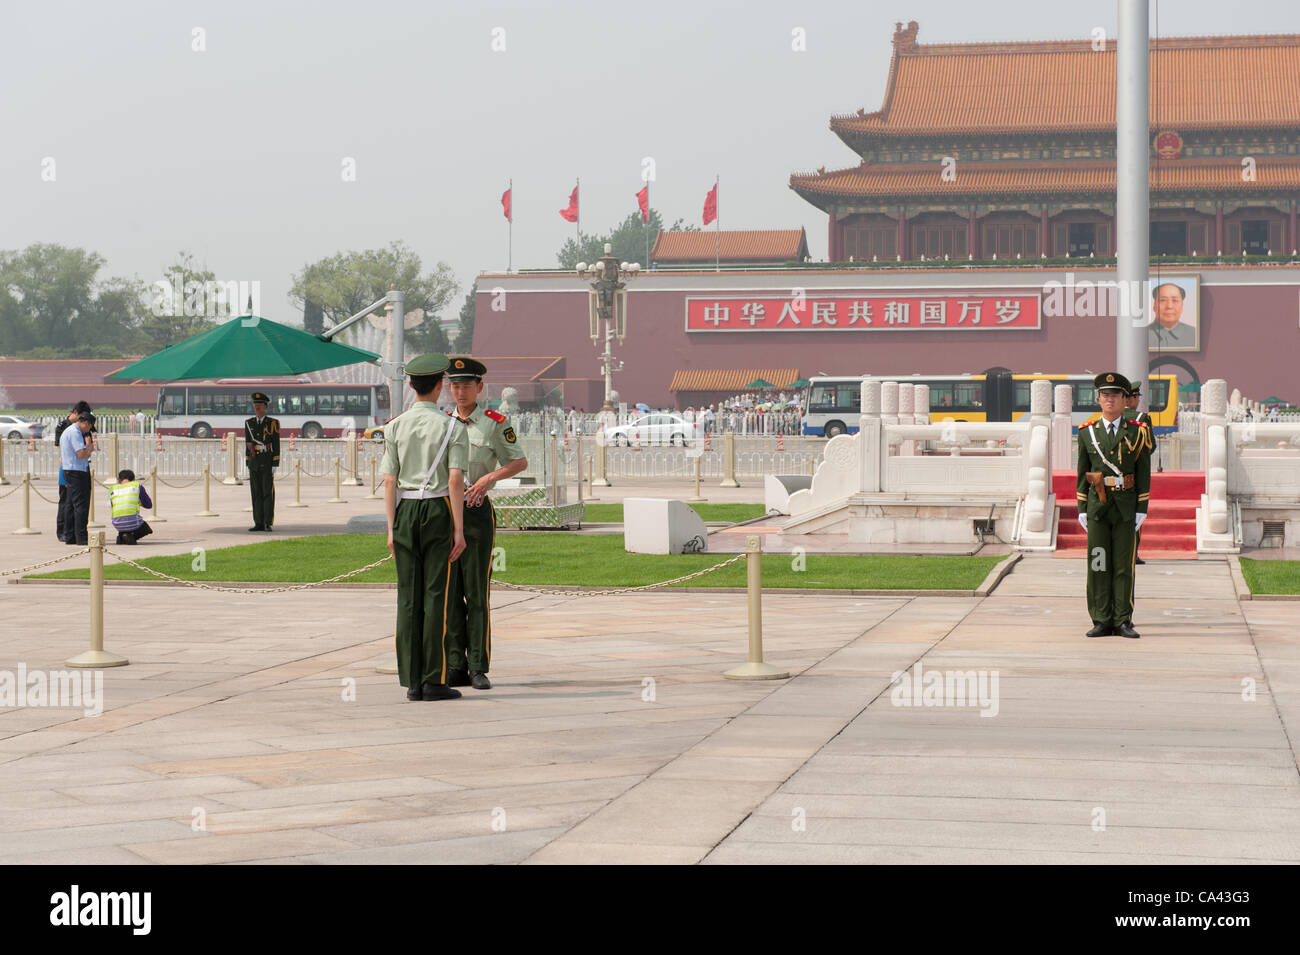 Change of military guards on Tiananmen Square, Beijing, China on Monday June 4, 2012. Security is tight on Tiananmen square as June 4th 2012 marks the 23rd anniversary of the military crackdown on students protests at Tiananmen Square in 1989. Stock Photo